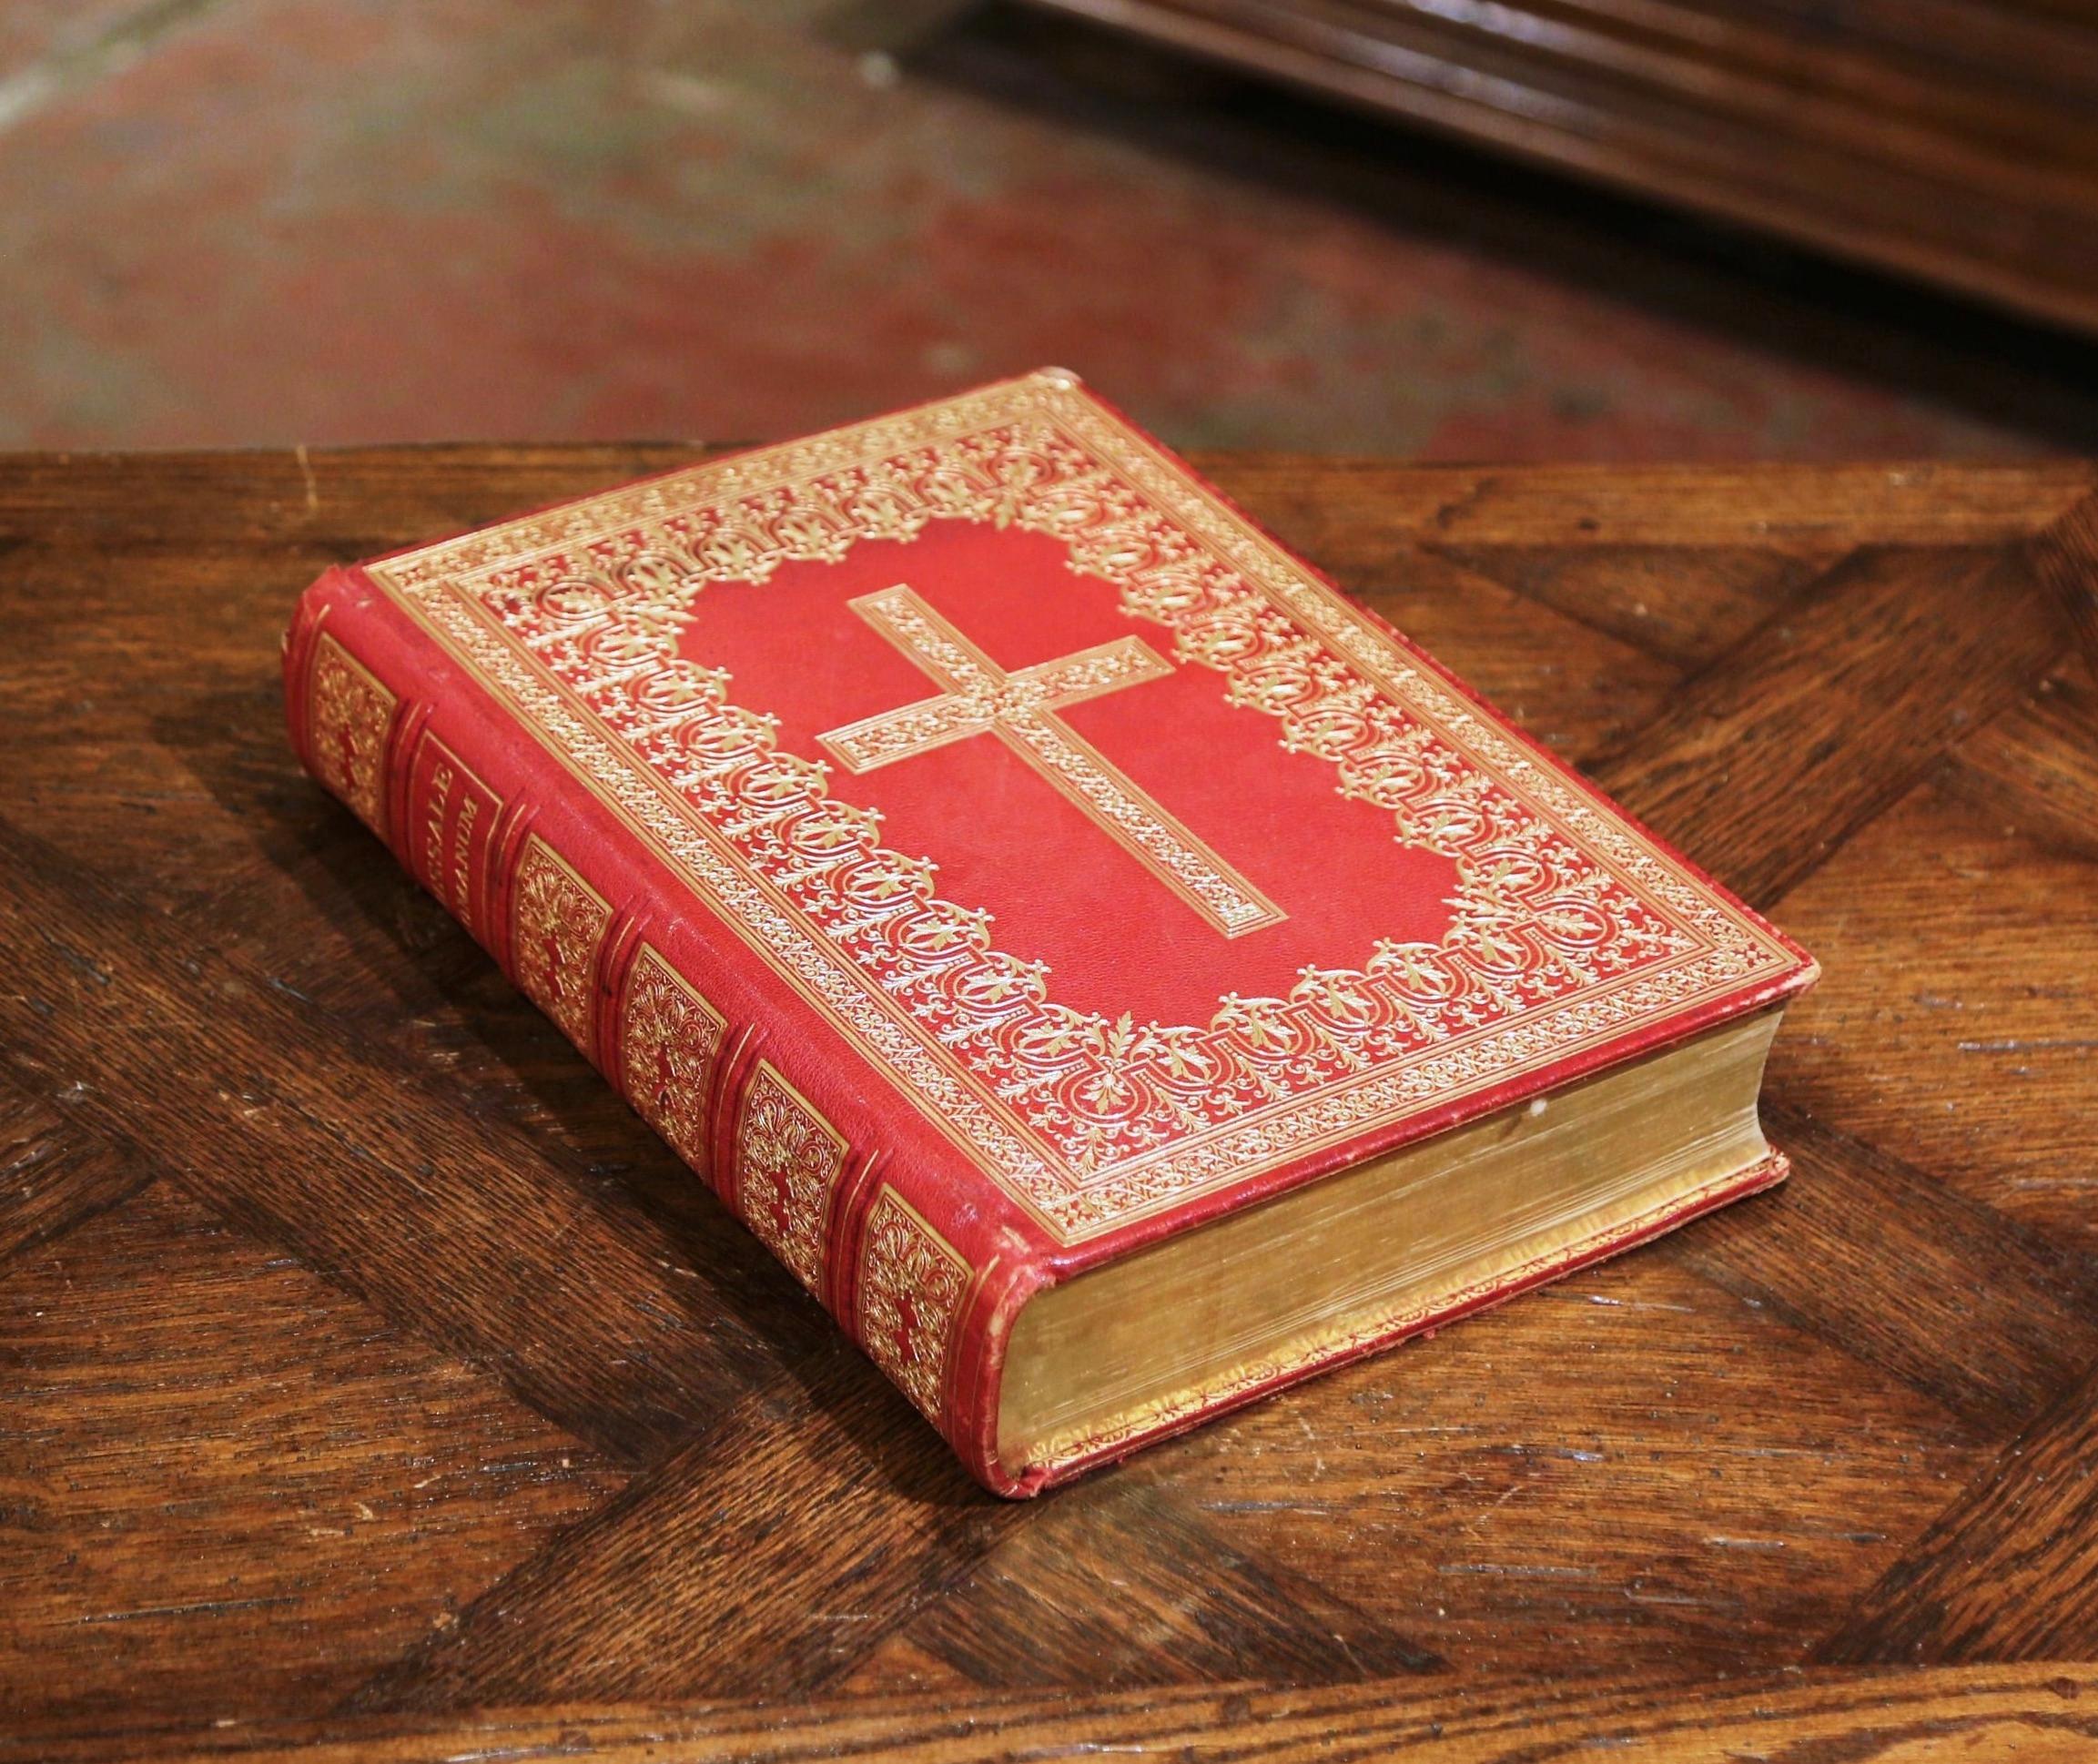 Italian Early 20th Century Latin Red and Gilt Leather Bound Church Missal Dated 1923